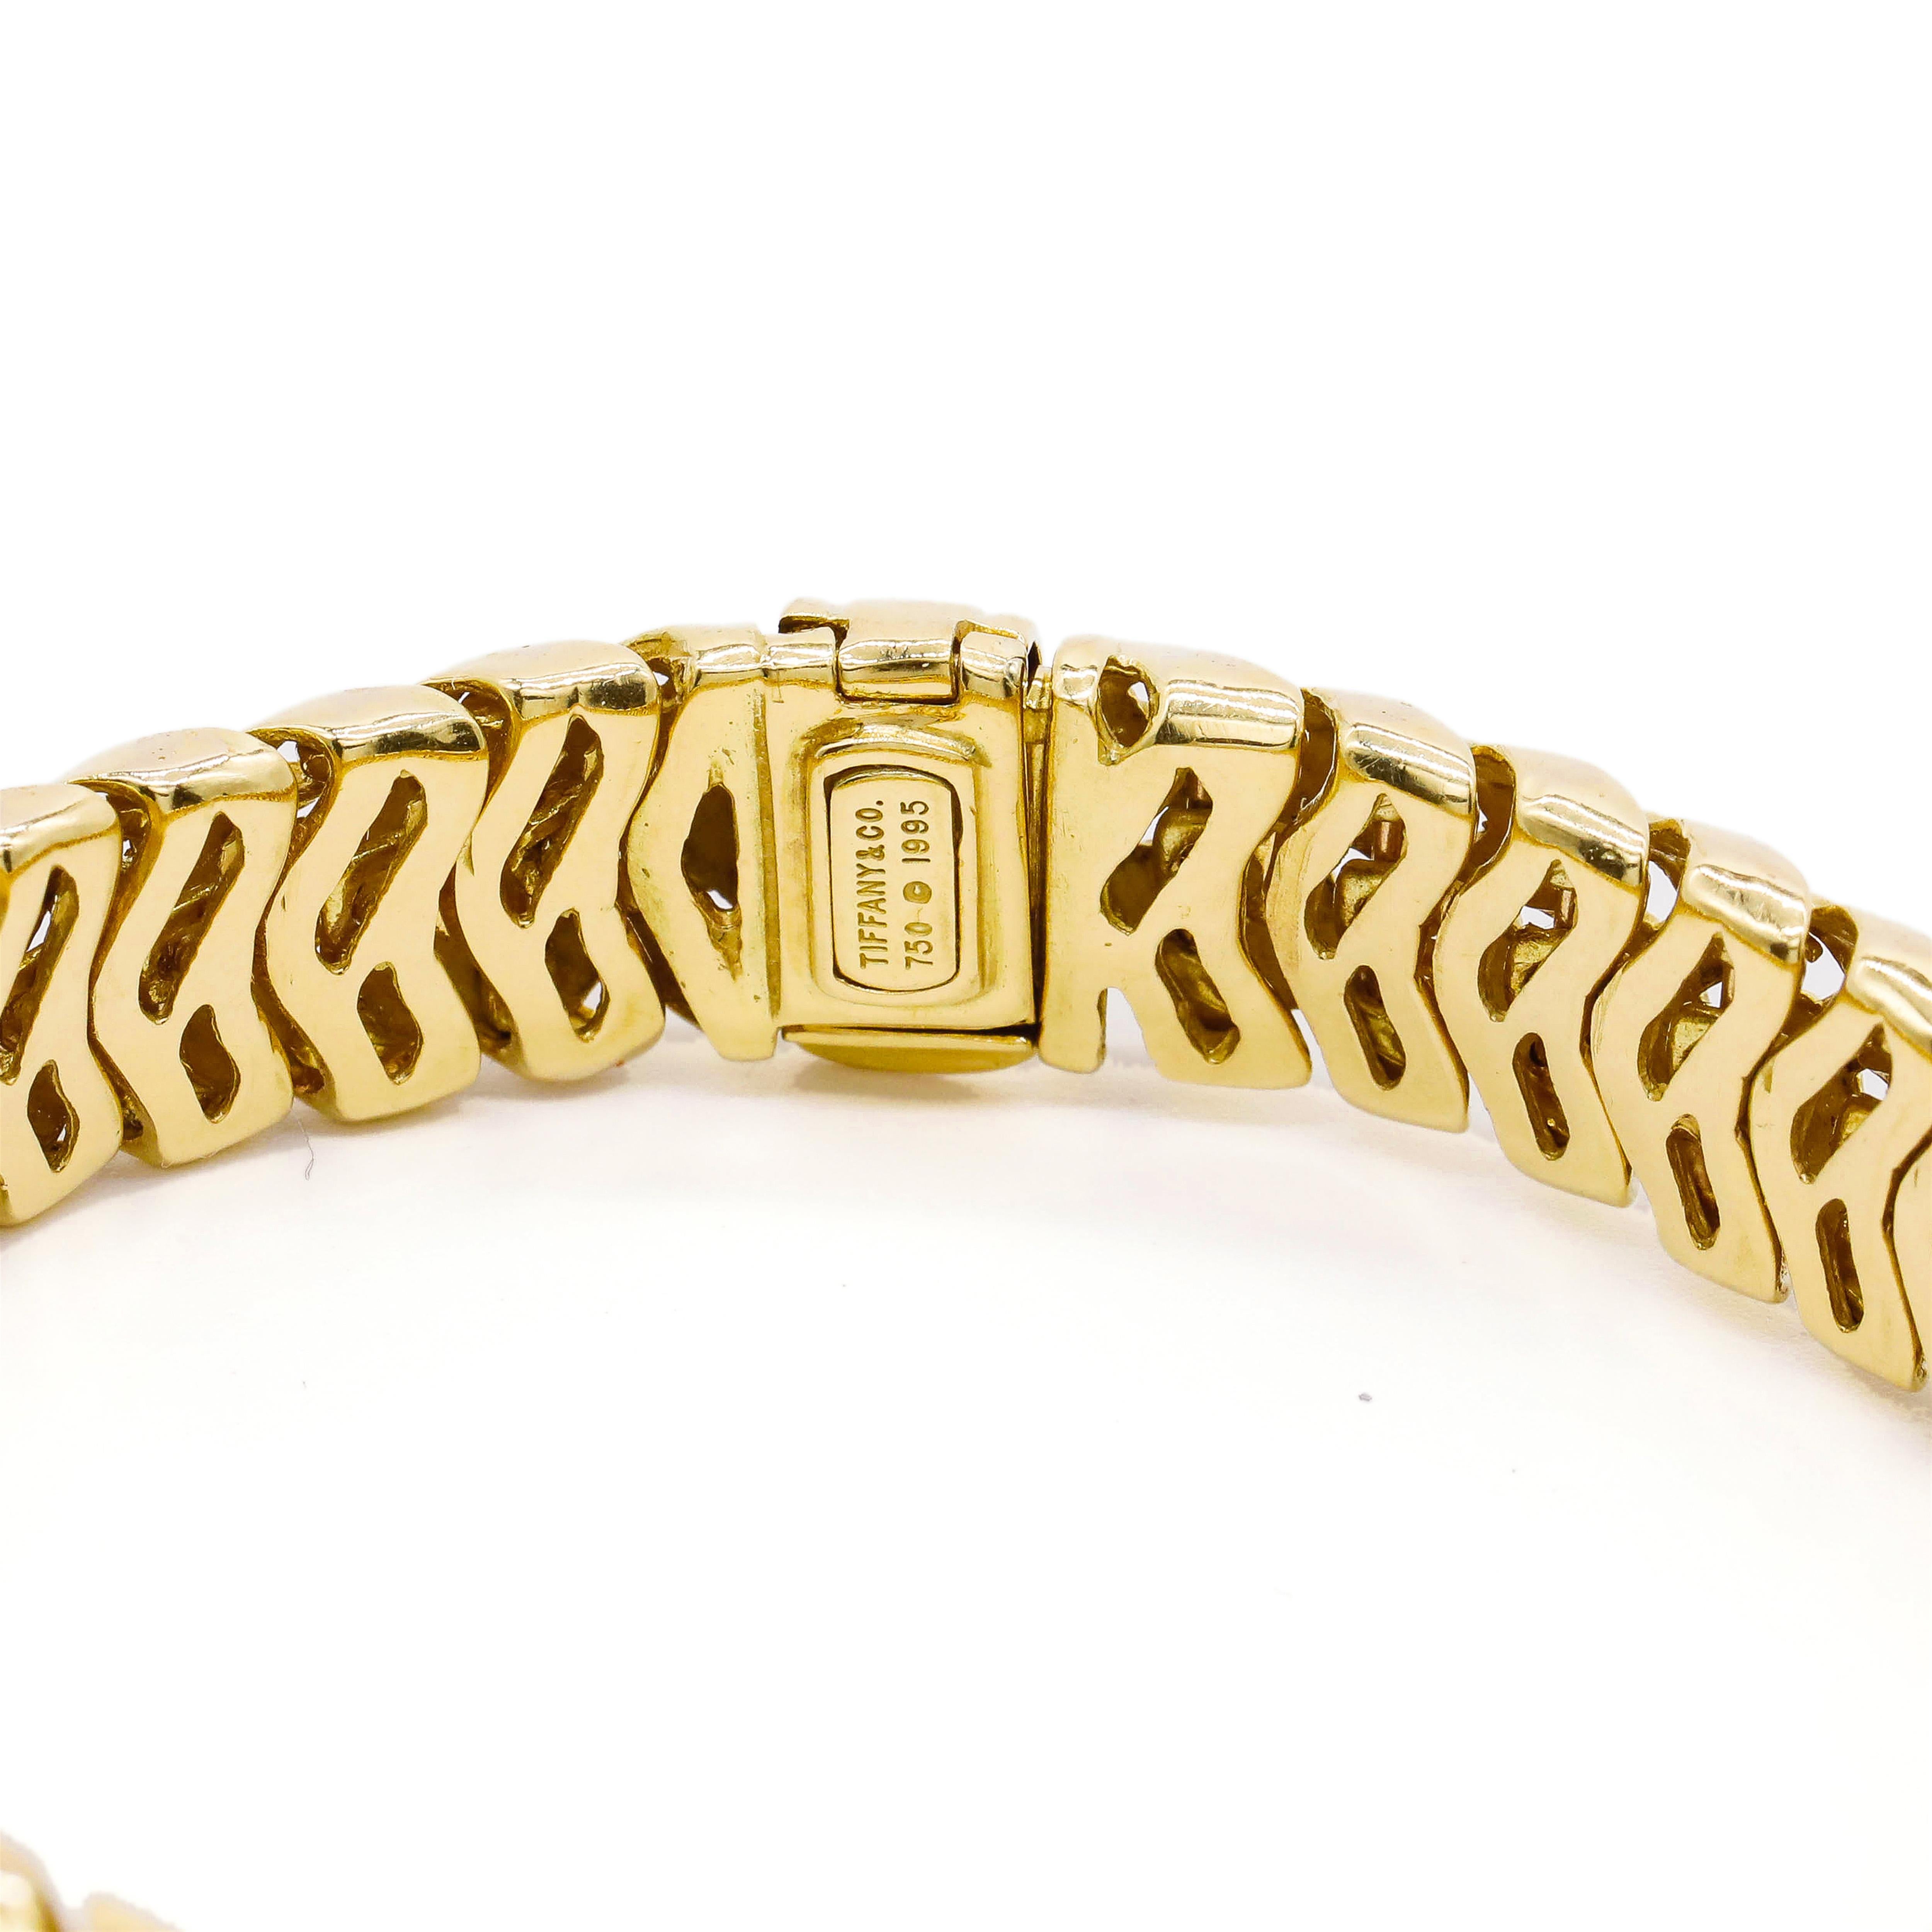 Tiffany & Co signed 18 karat Yellow Gold Woven Design Bracelet

Timeless classic woven design Tiffany bracelet that is easy to wear soft and fluid for every day use.
Tiffany and Co woven design Bracelet 18k gold woven design bracelet signed Tiffany